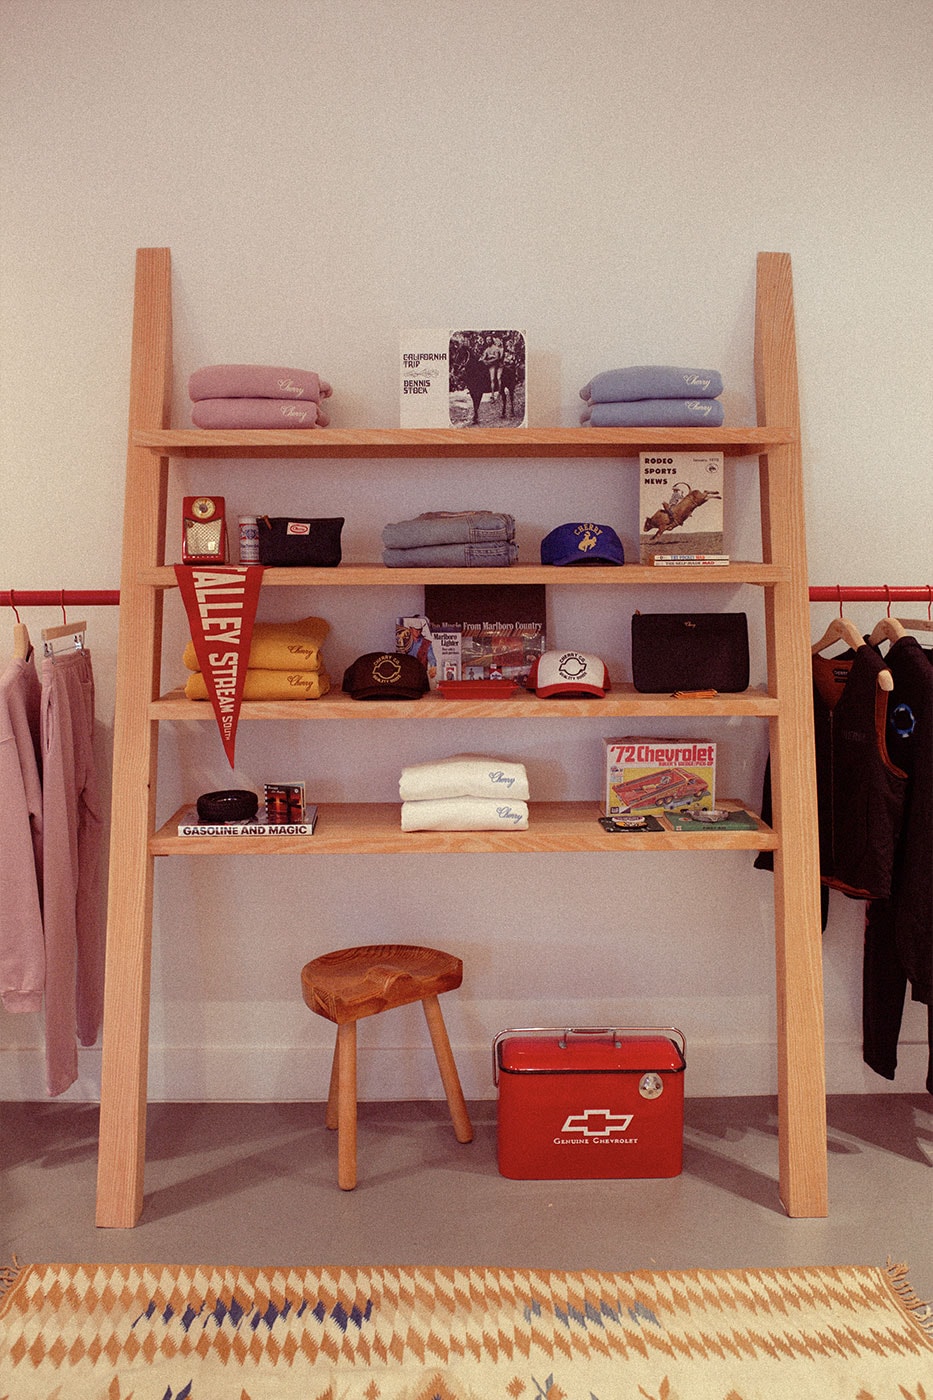 Cherry General Store Quality Goods Opens on 8475 Melrose Ave 90069 June 25 los angeles california opening date info